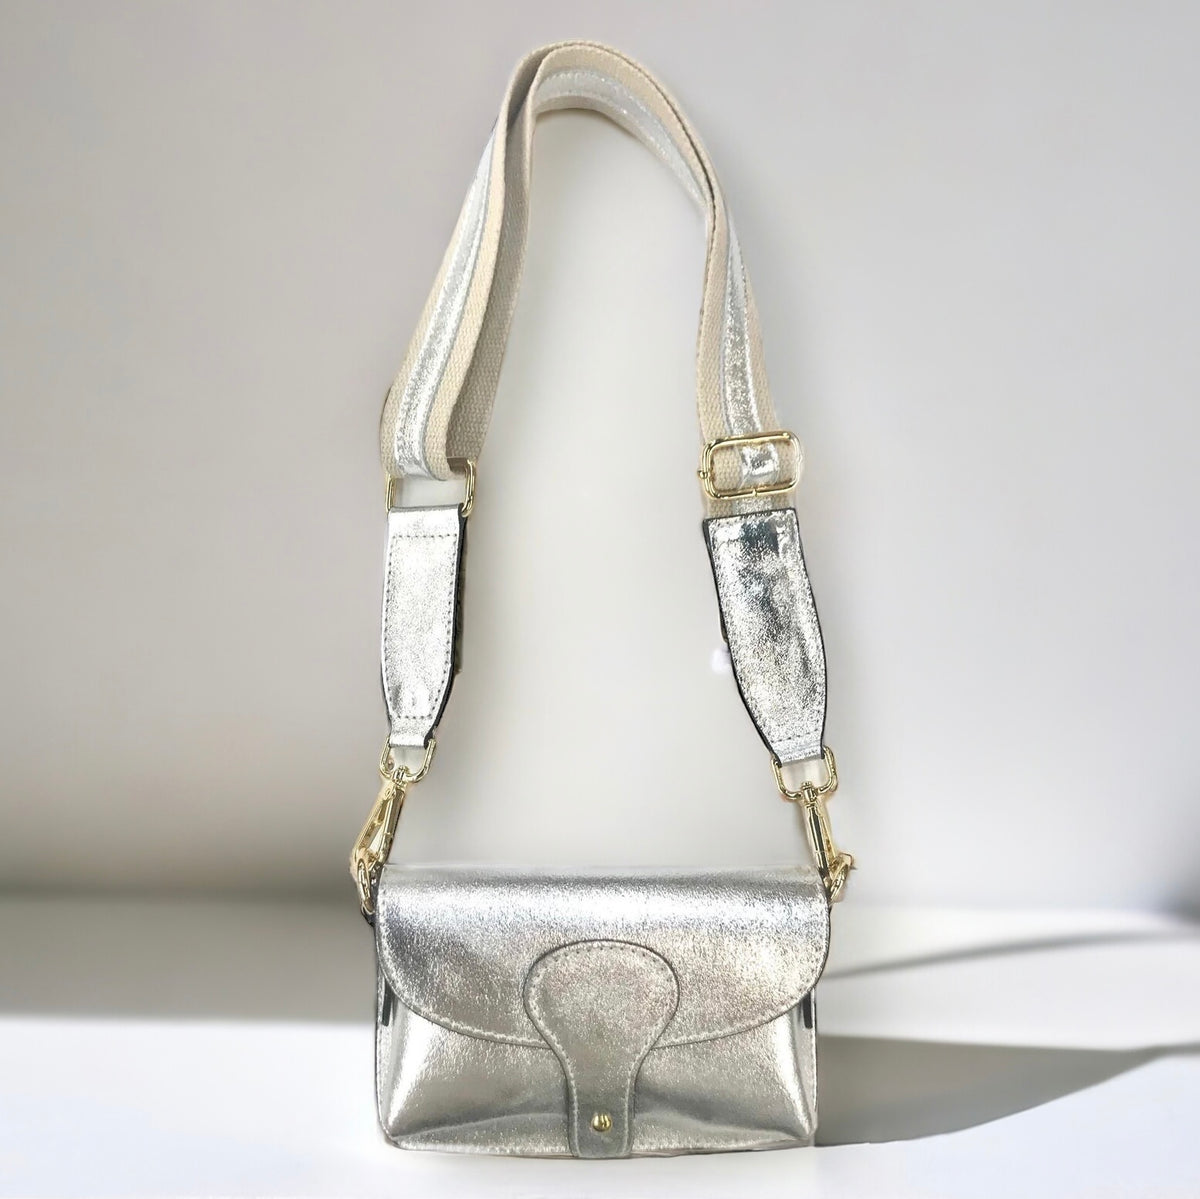 Mini Leather Messenger Crossbody Bag - Silver-240 Bags-BC Handbags-Coastal Bloom Boutique, find the trendiest versions of the popular styles and looks Located in Indialantic, FL